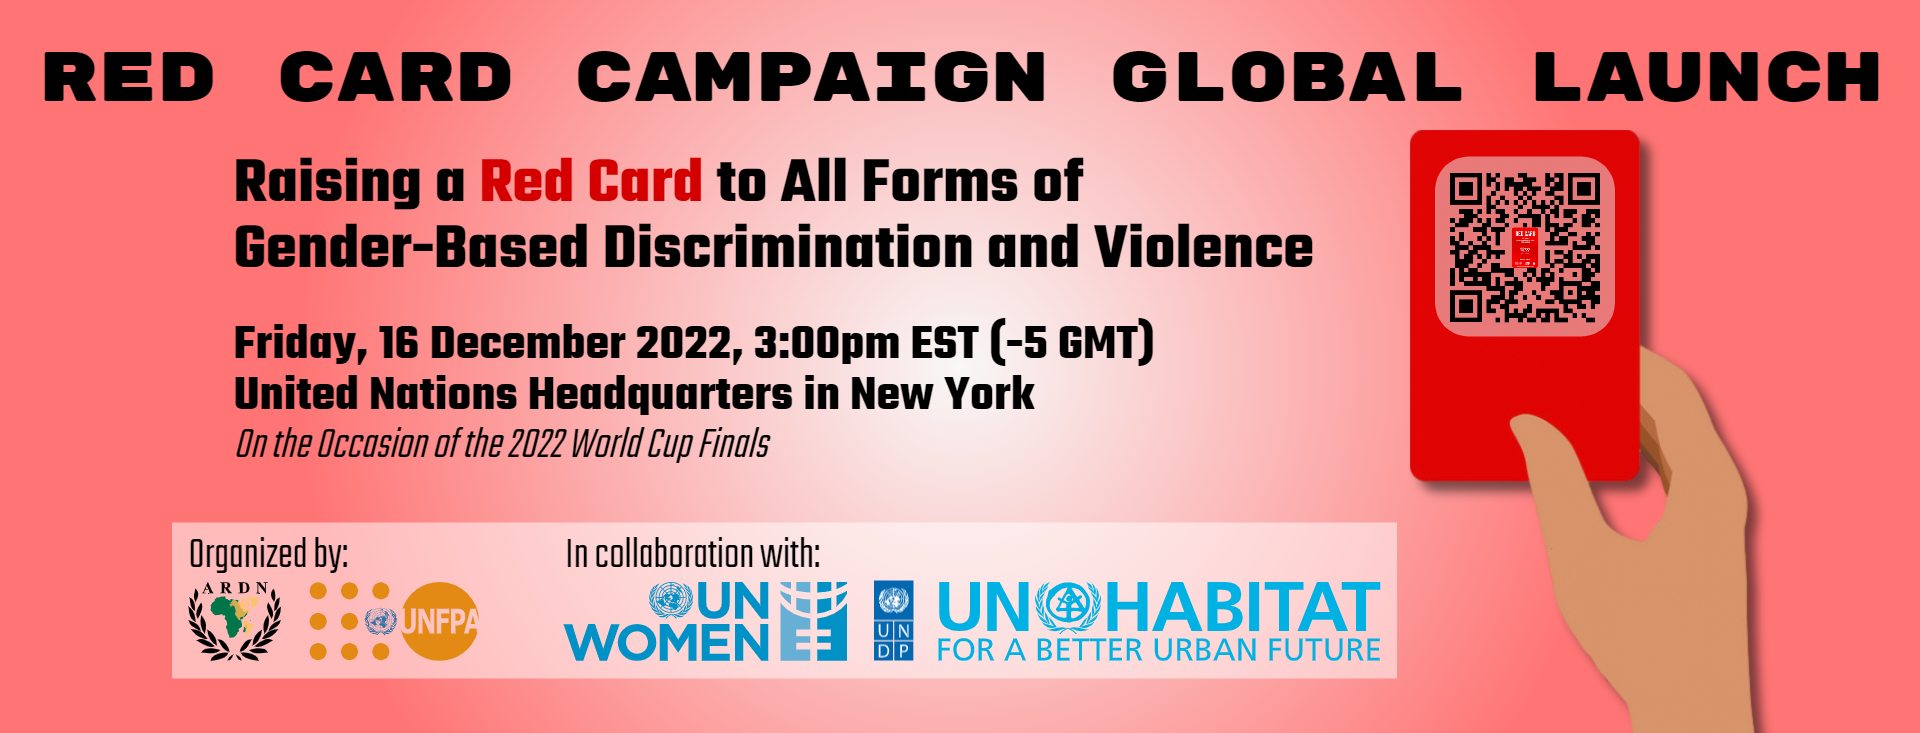 Red Card Campaign Global Launch: Raising a Red Card to All Forms of Discrimination and Violence Against Women and Girls